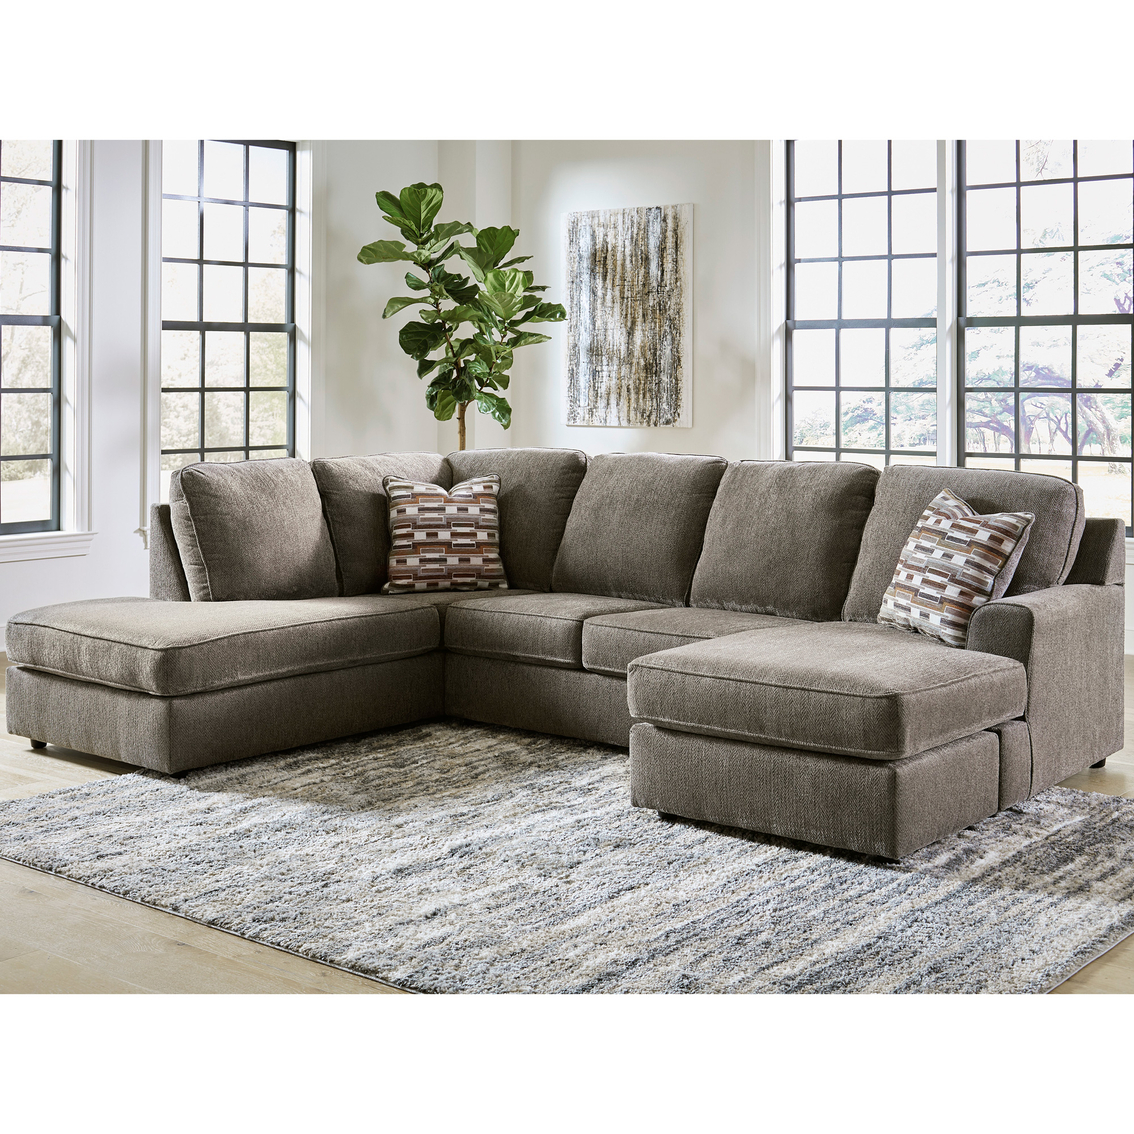 Signature Design by Ashley O'Phannon Sectional with Chaise - Image 2 of 3